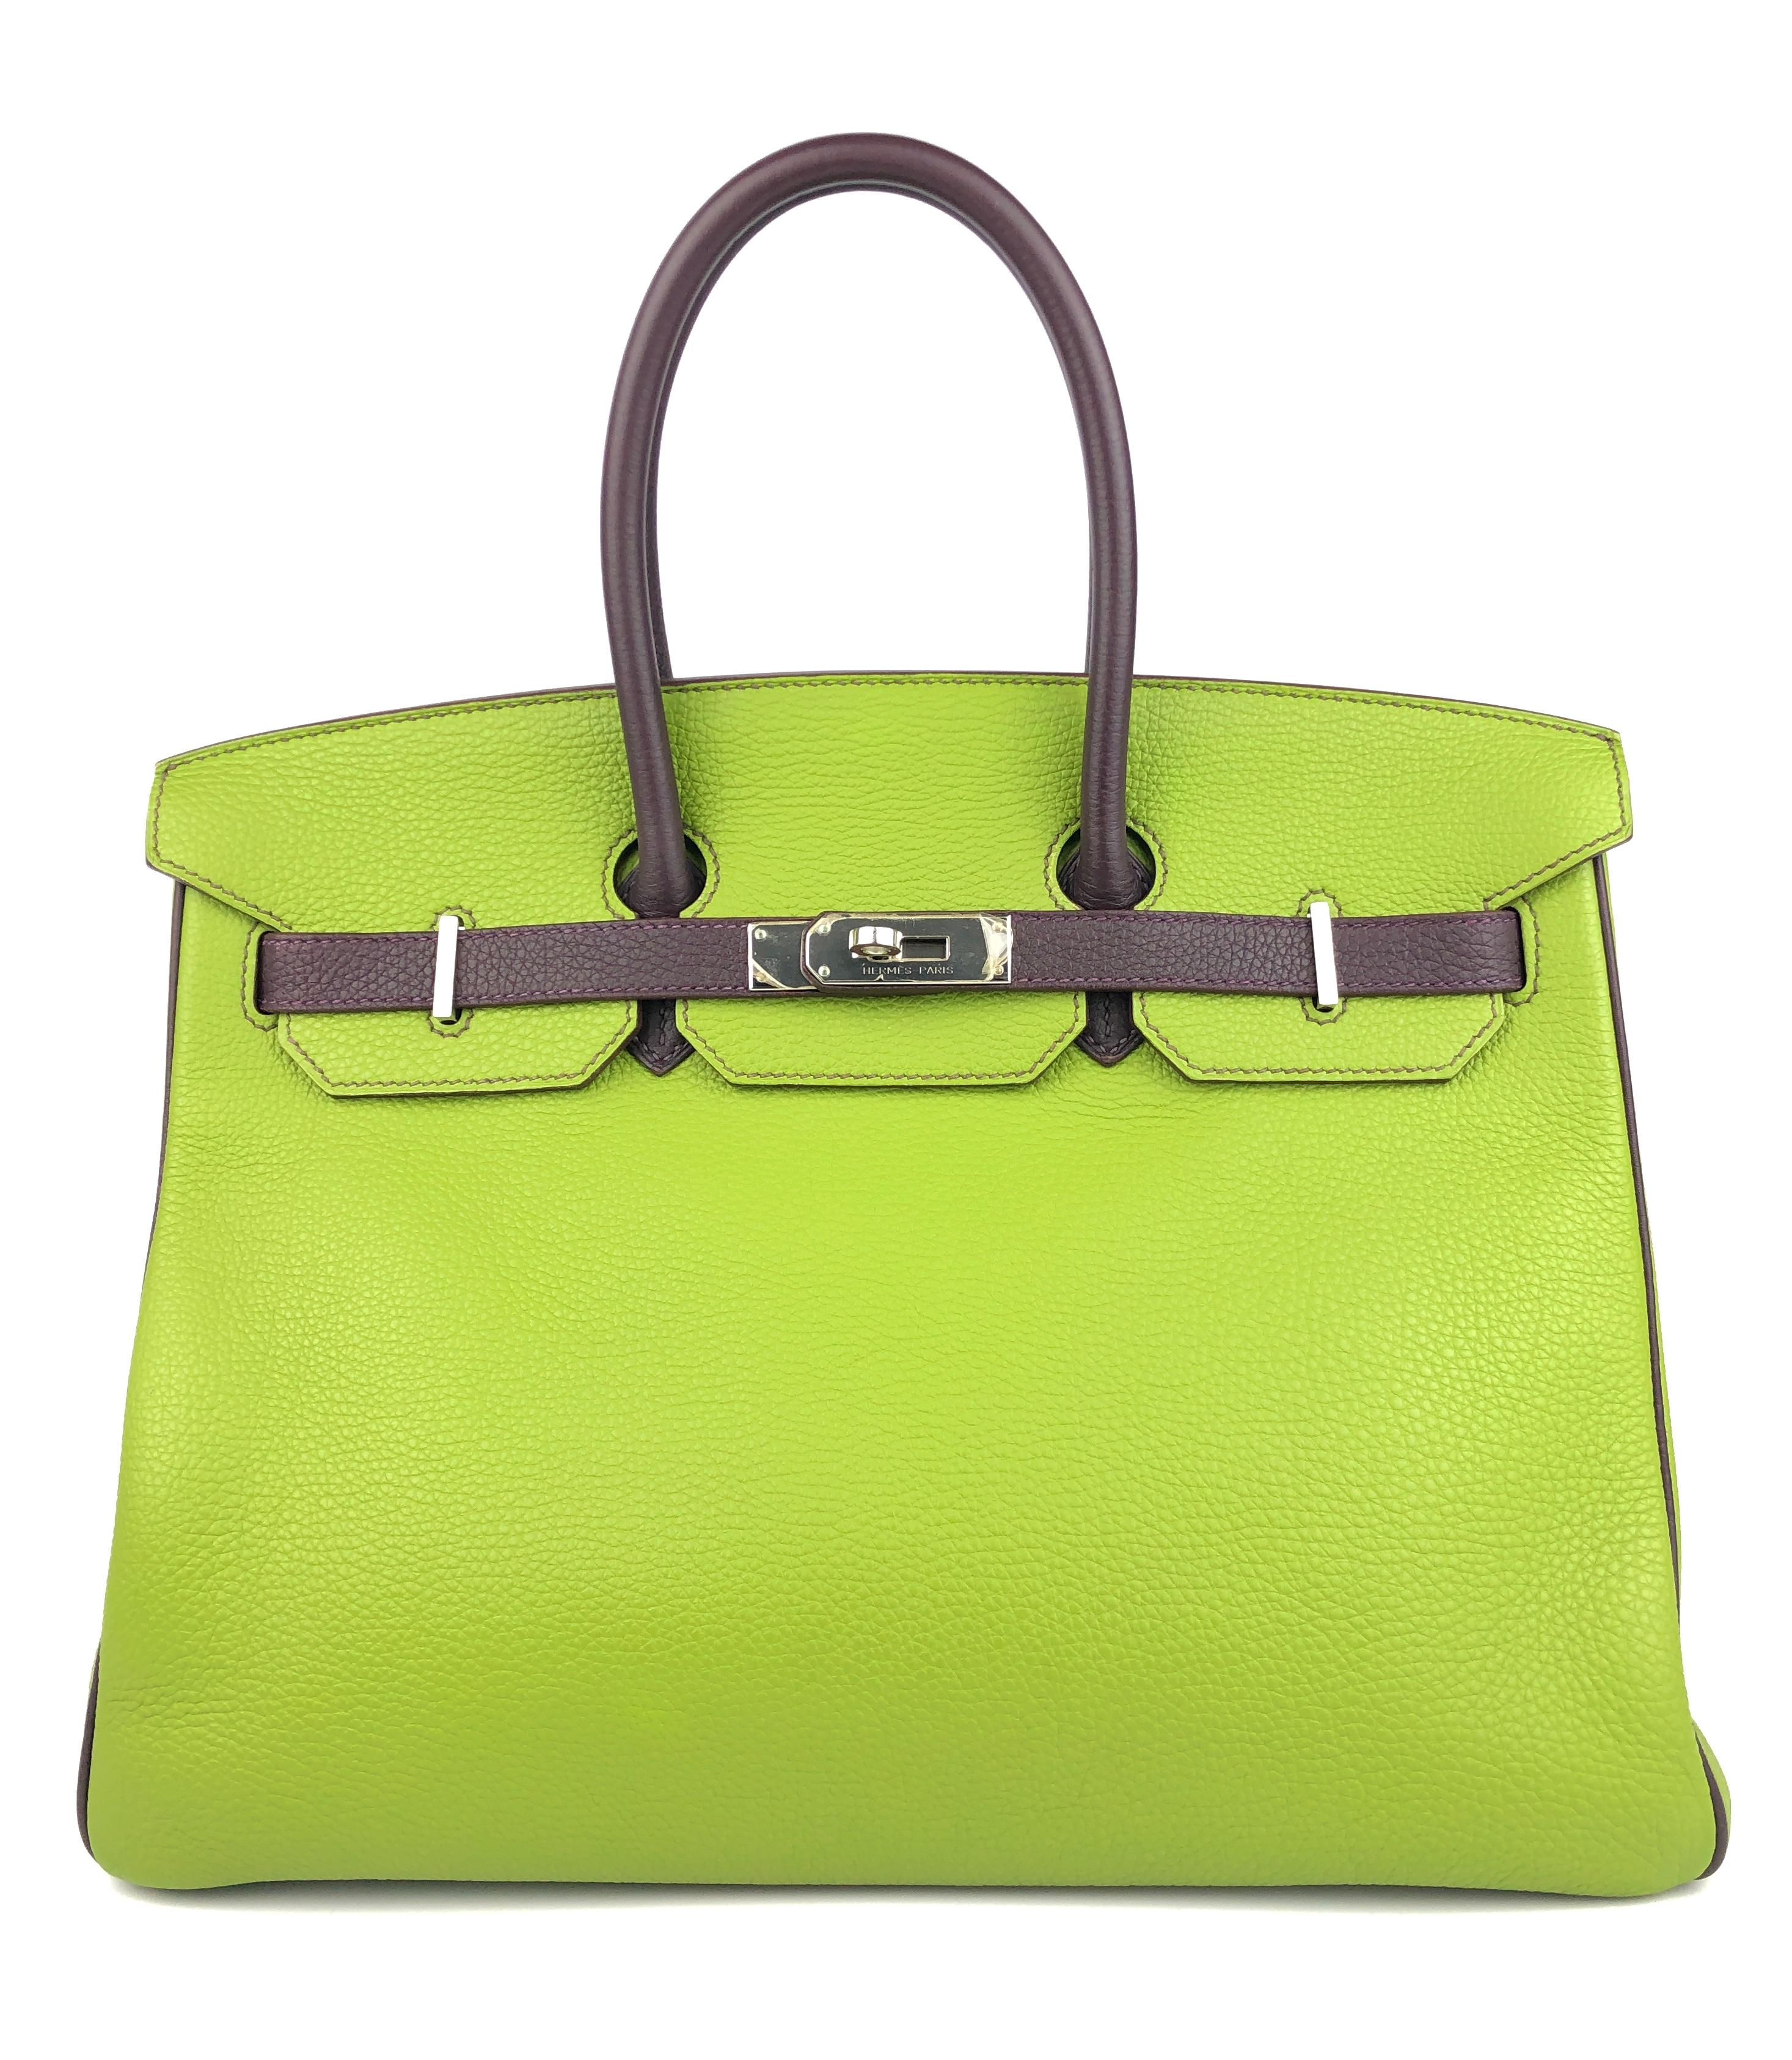 Stunning 1 of 1 Hermes Birkin 35 HSS Special Order Vert Anis Green Raisin Purple Leather Palladium Hardware. Excellent condition plastic on hardware beautiful buttery leather. 

Shop with Confidence from Lux Addicts. Authenticity Guaranteed! 
